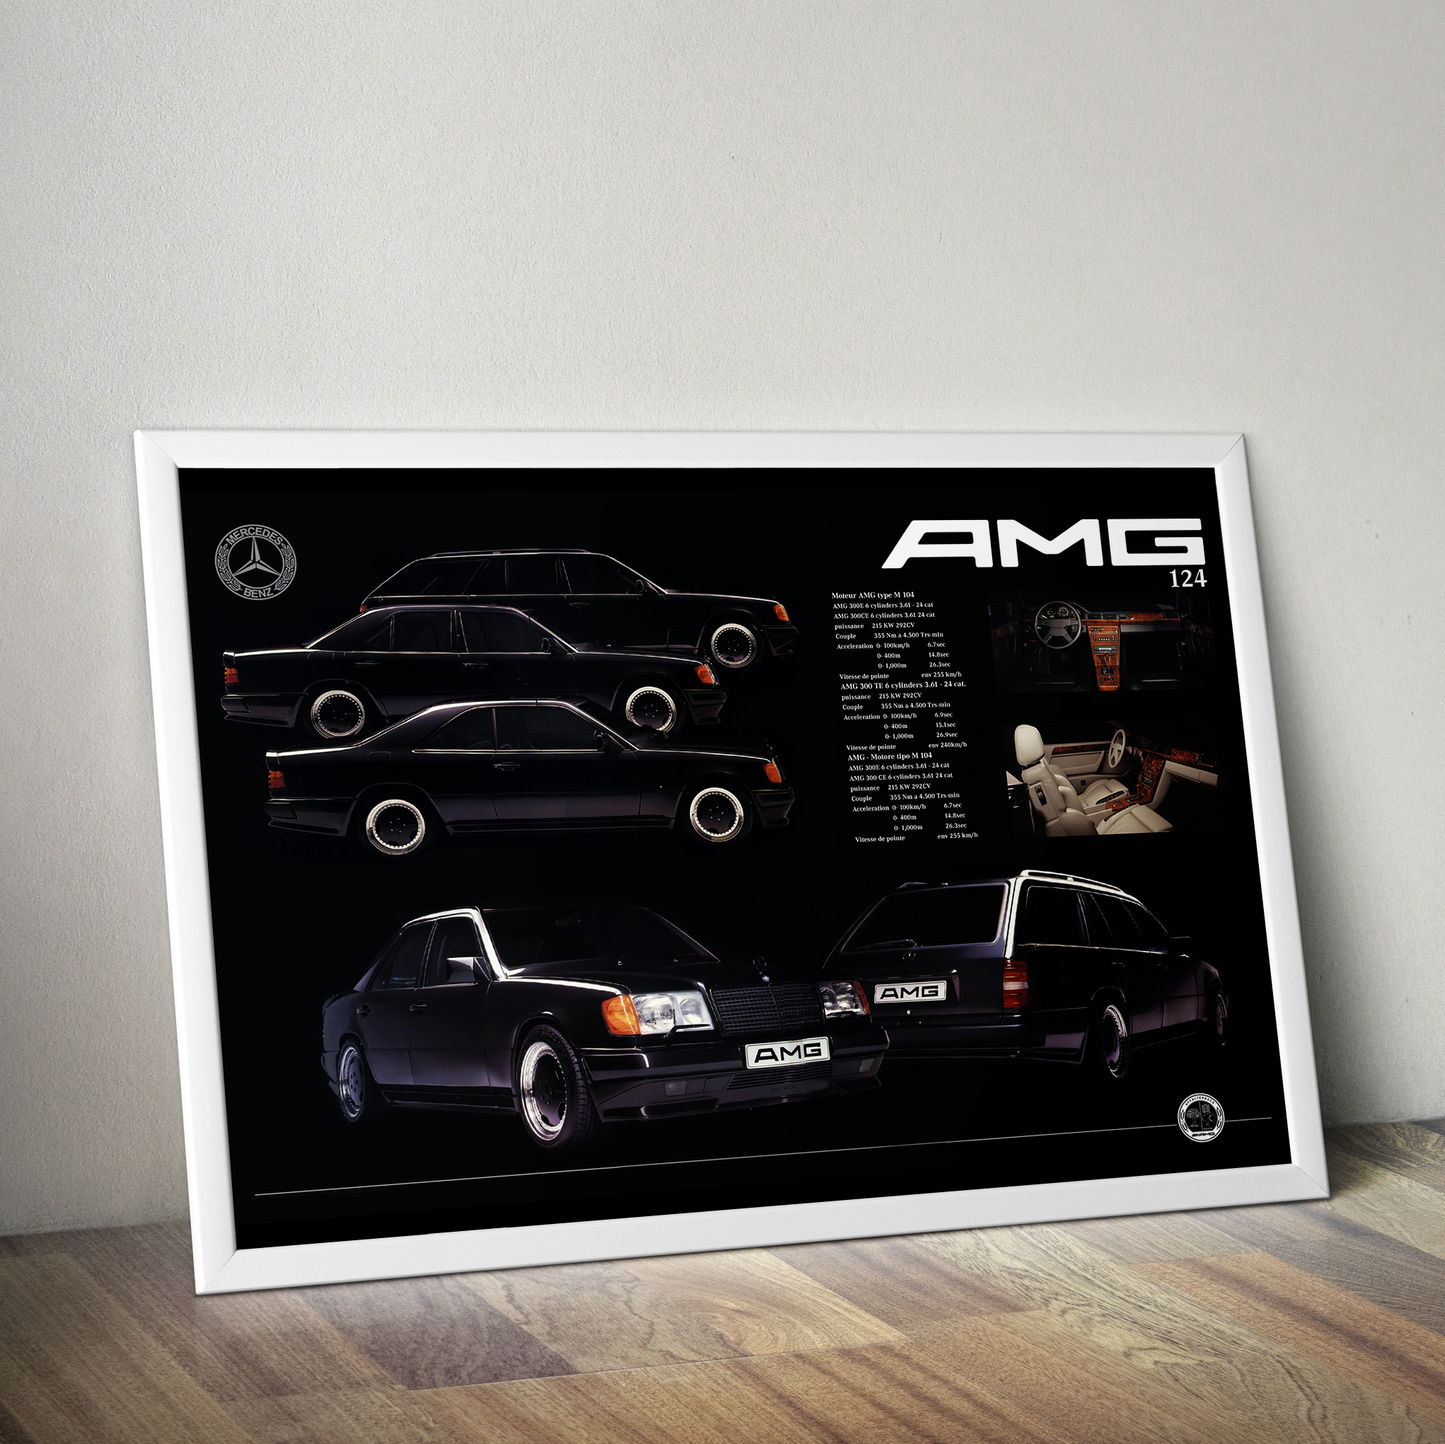 Mercedes W124 amg line up poster